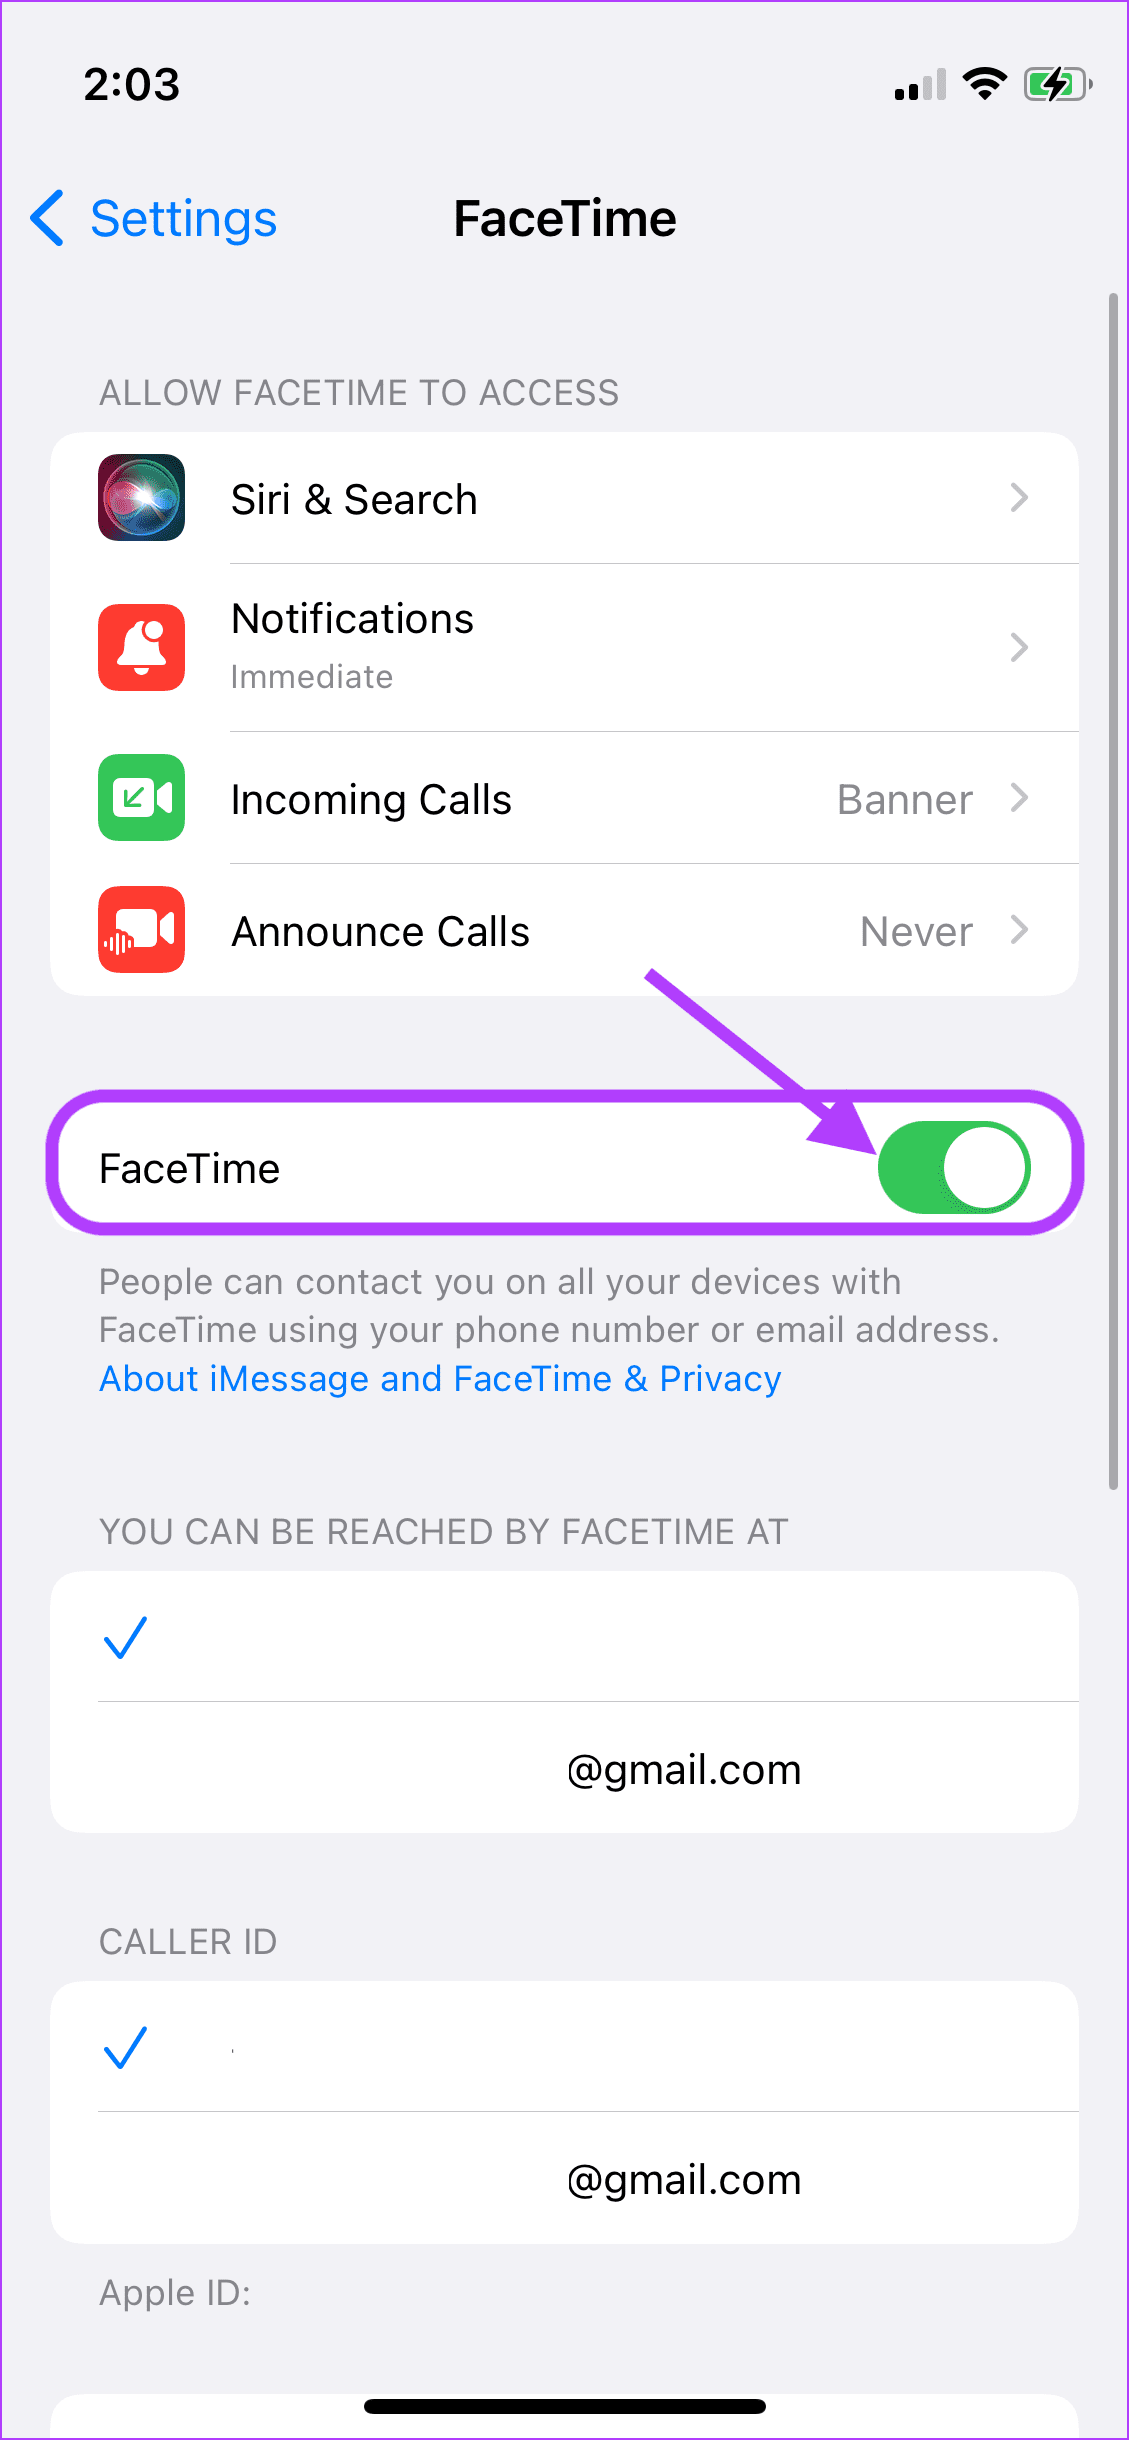 2. Sing out of FaceTime 3